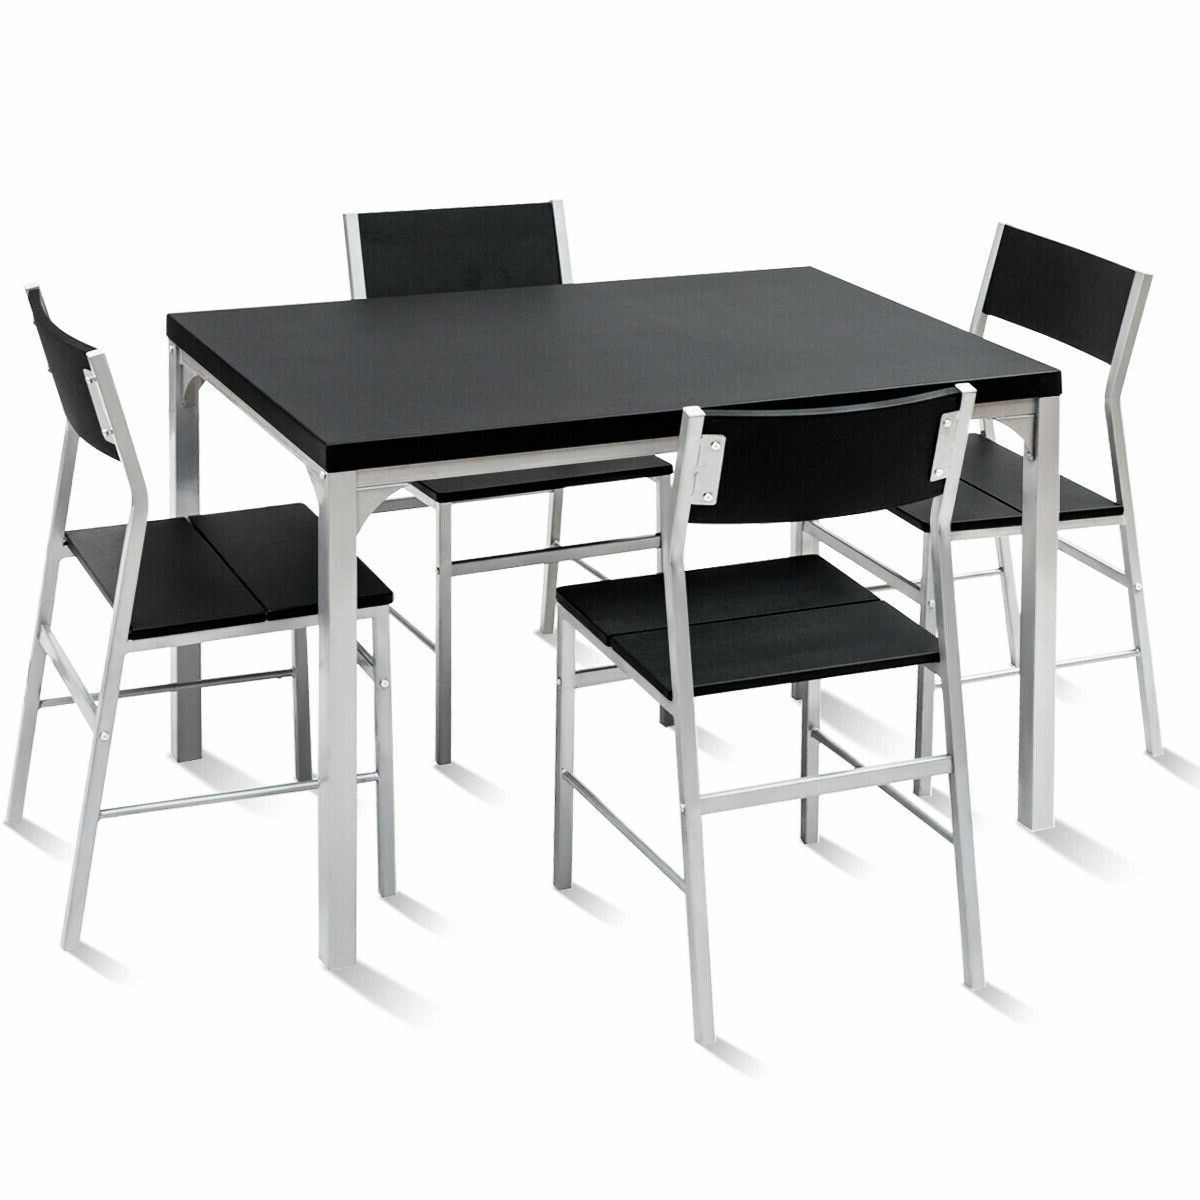 Catalina 5 Piece Dining Set With Latest Autberry 5 Piece Dining Sets (View 9 of 20)